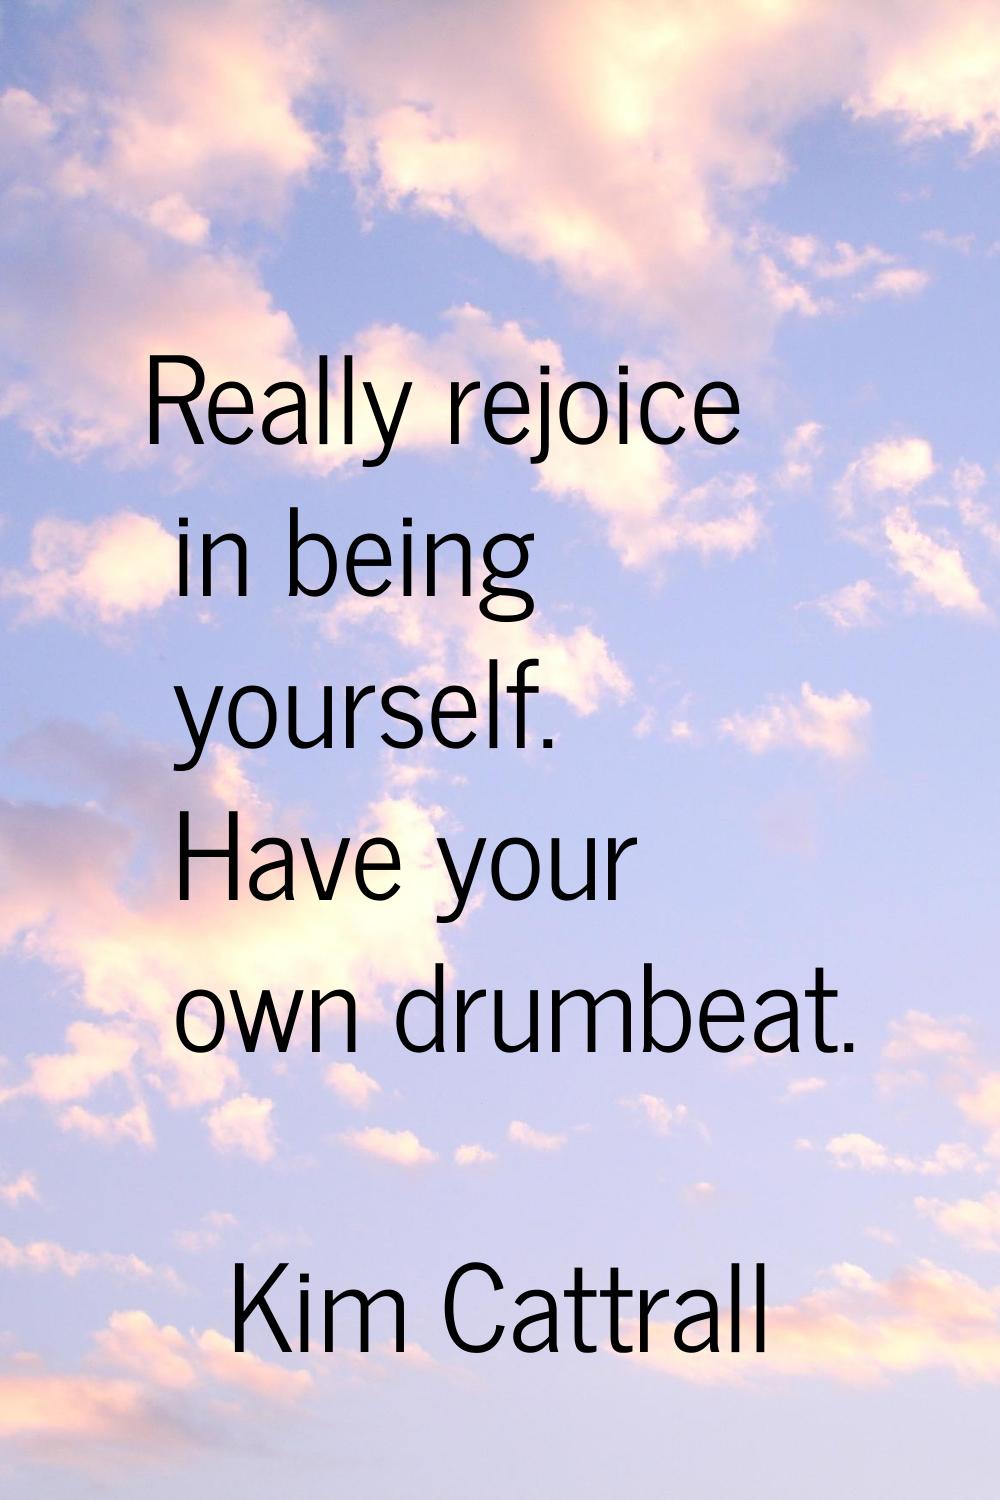 Really rejoice in being yourself. Have your own drumbeat.